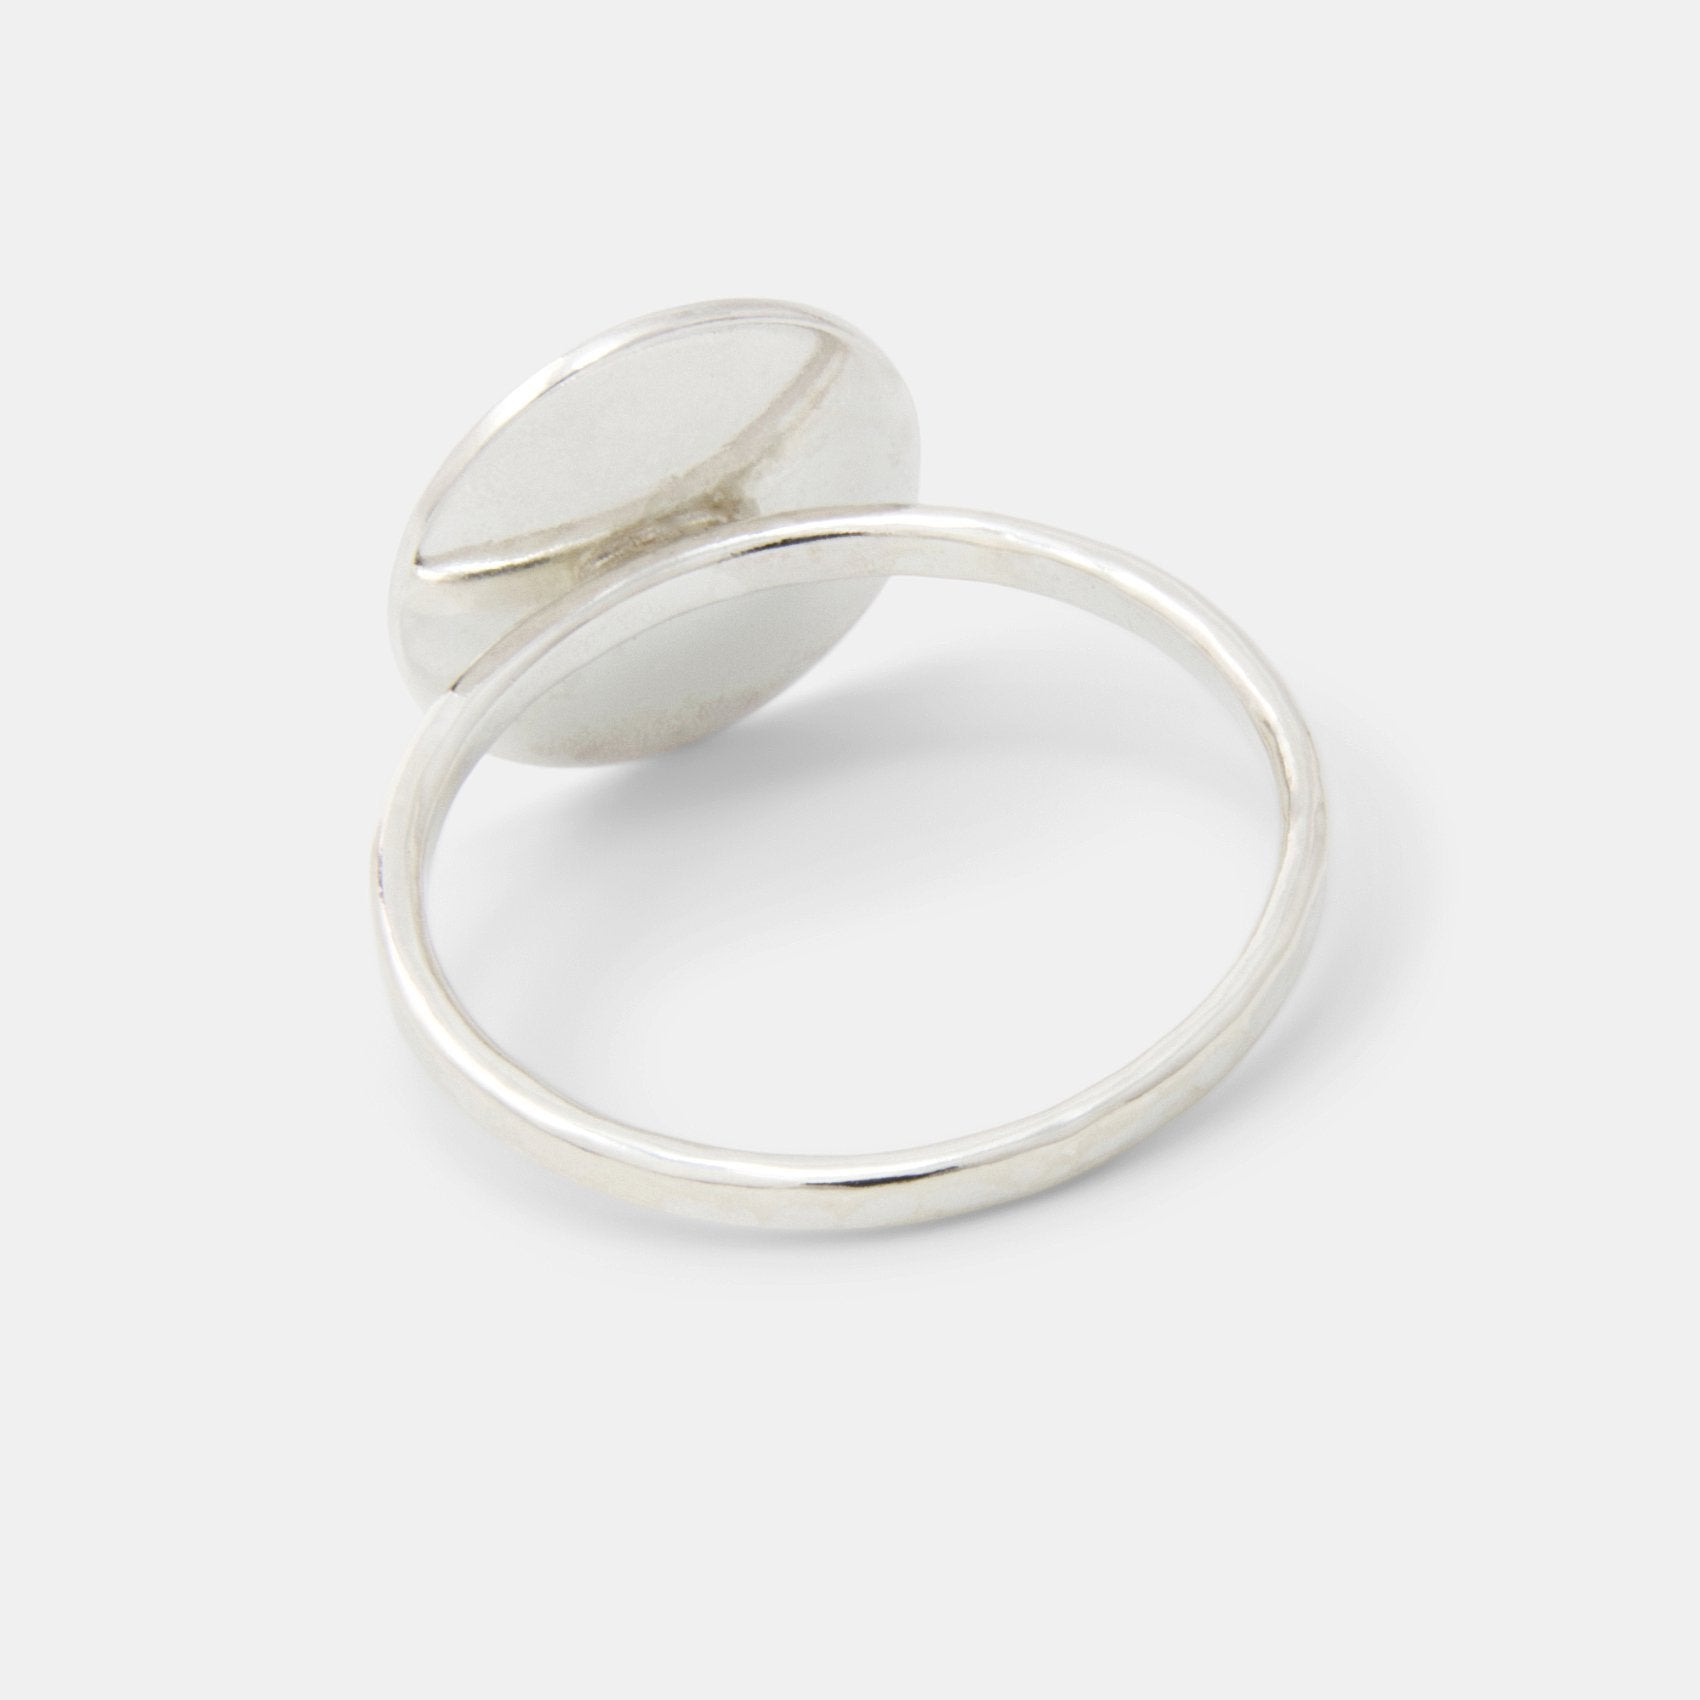 Coral texture silver cocktail ring - Simone Walsh Jewellery Australia